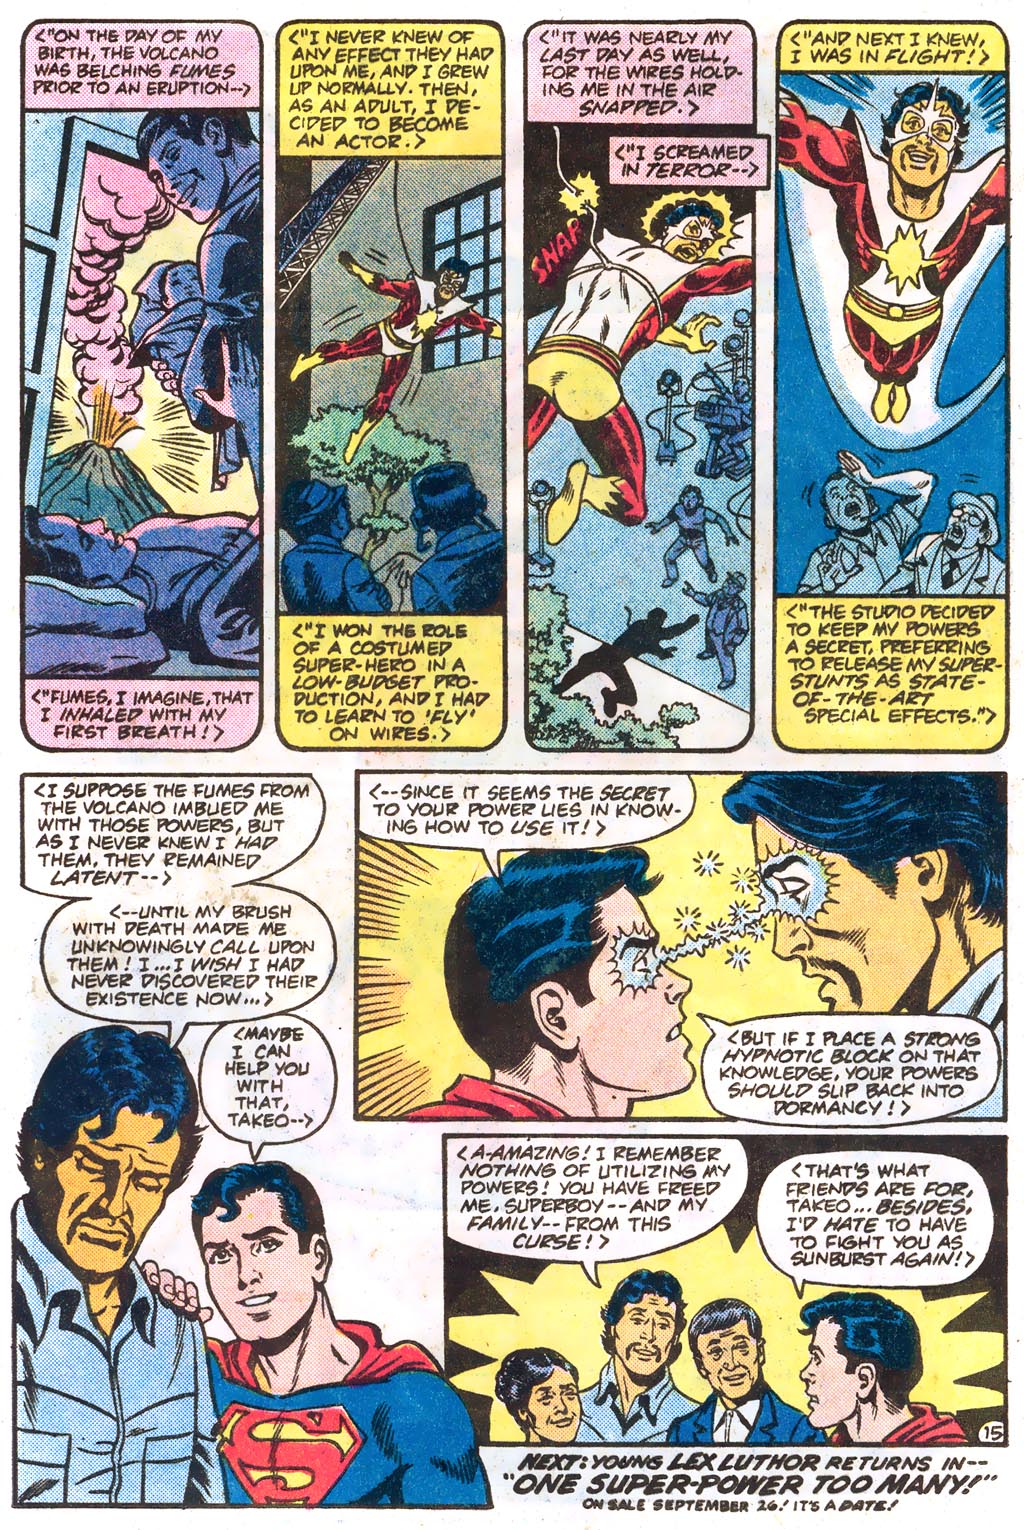 The New Adventures of Superboy 47 Page 19